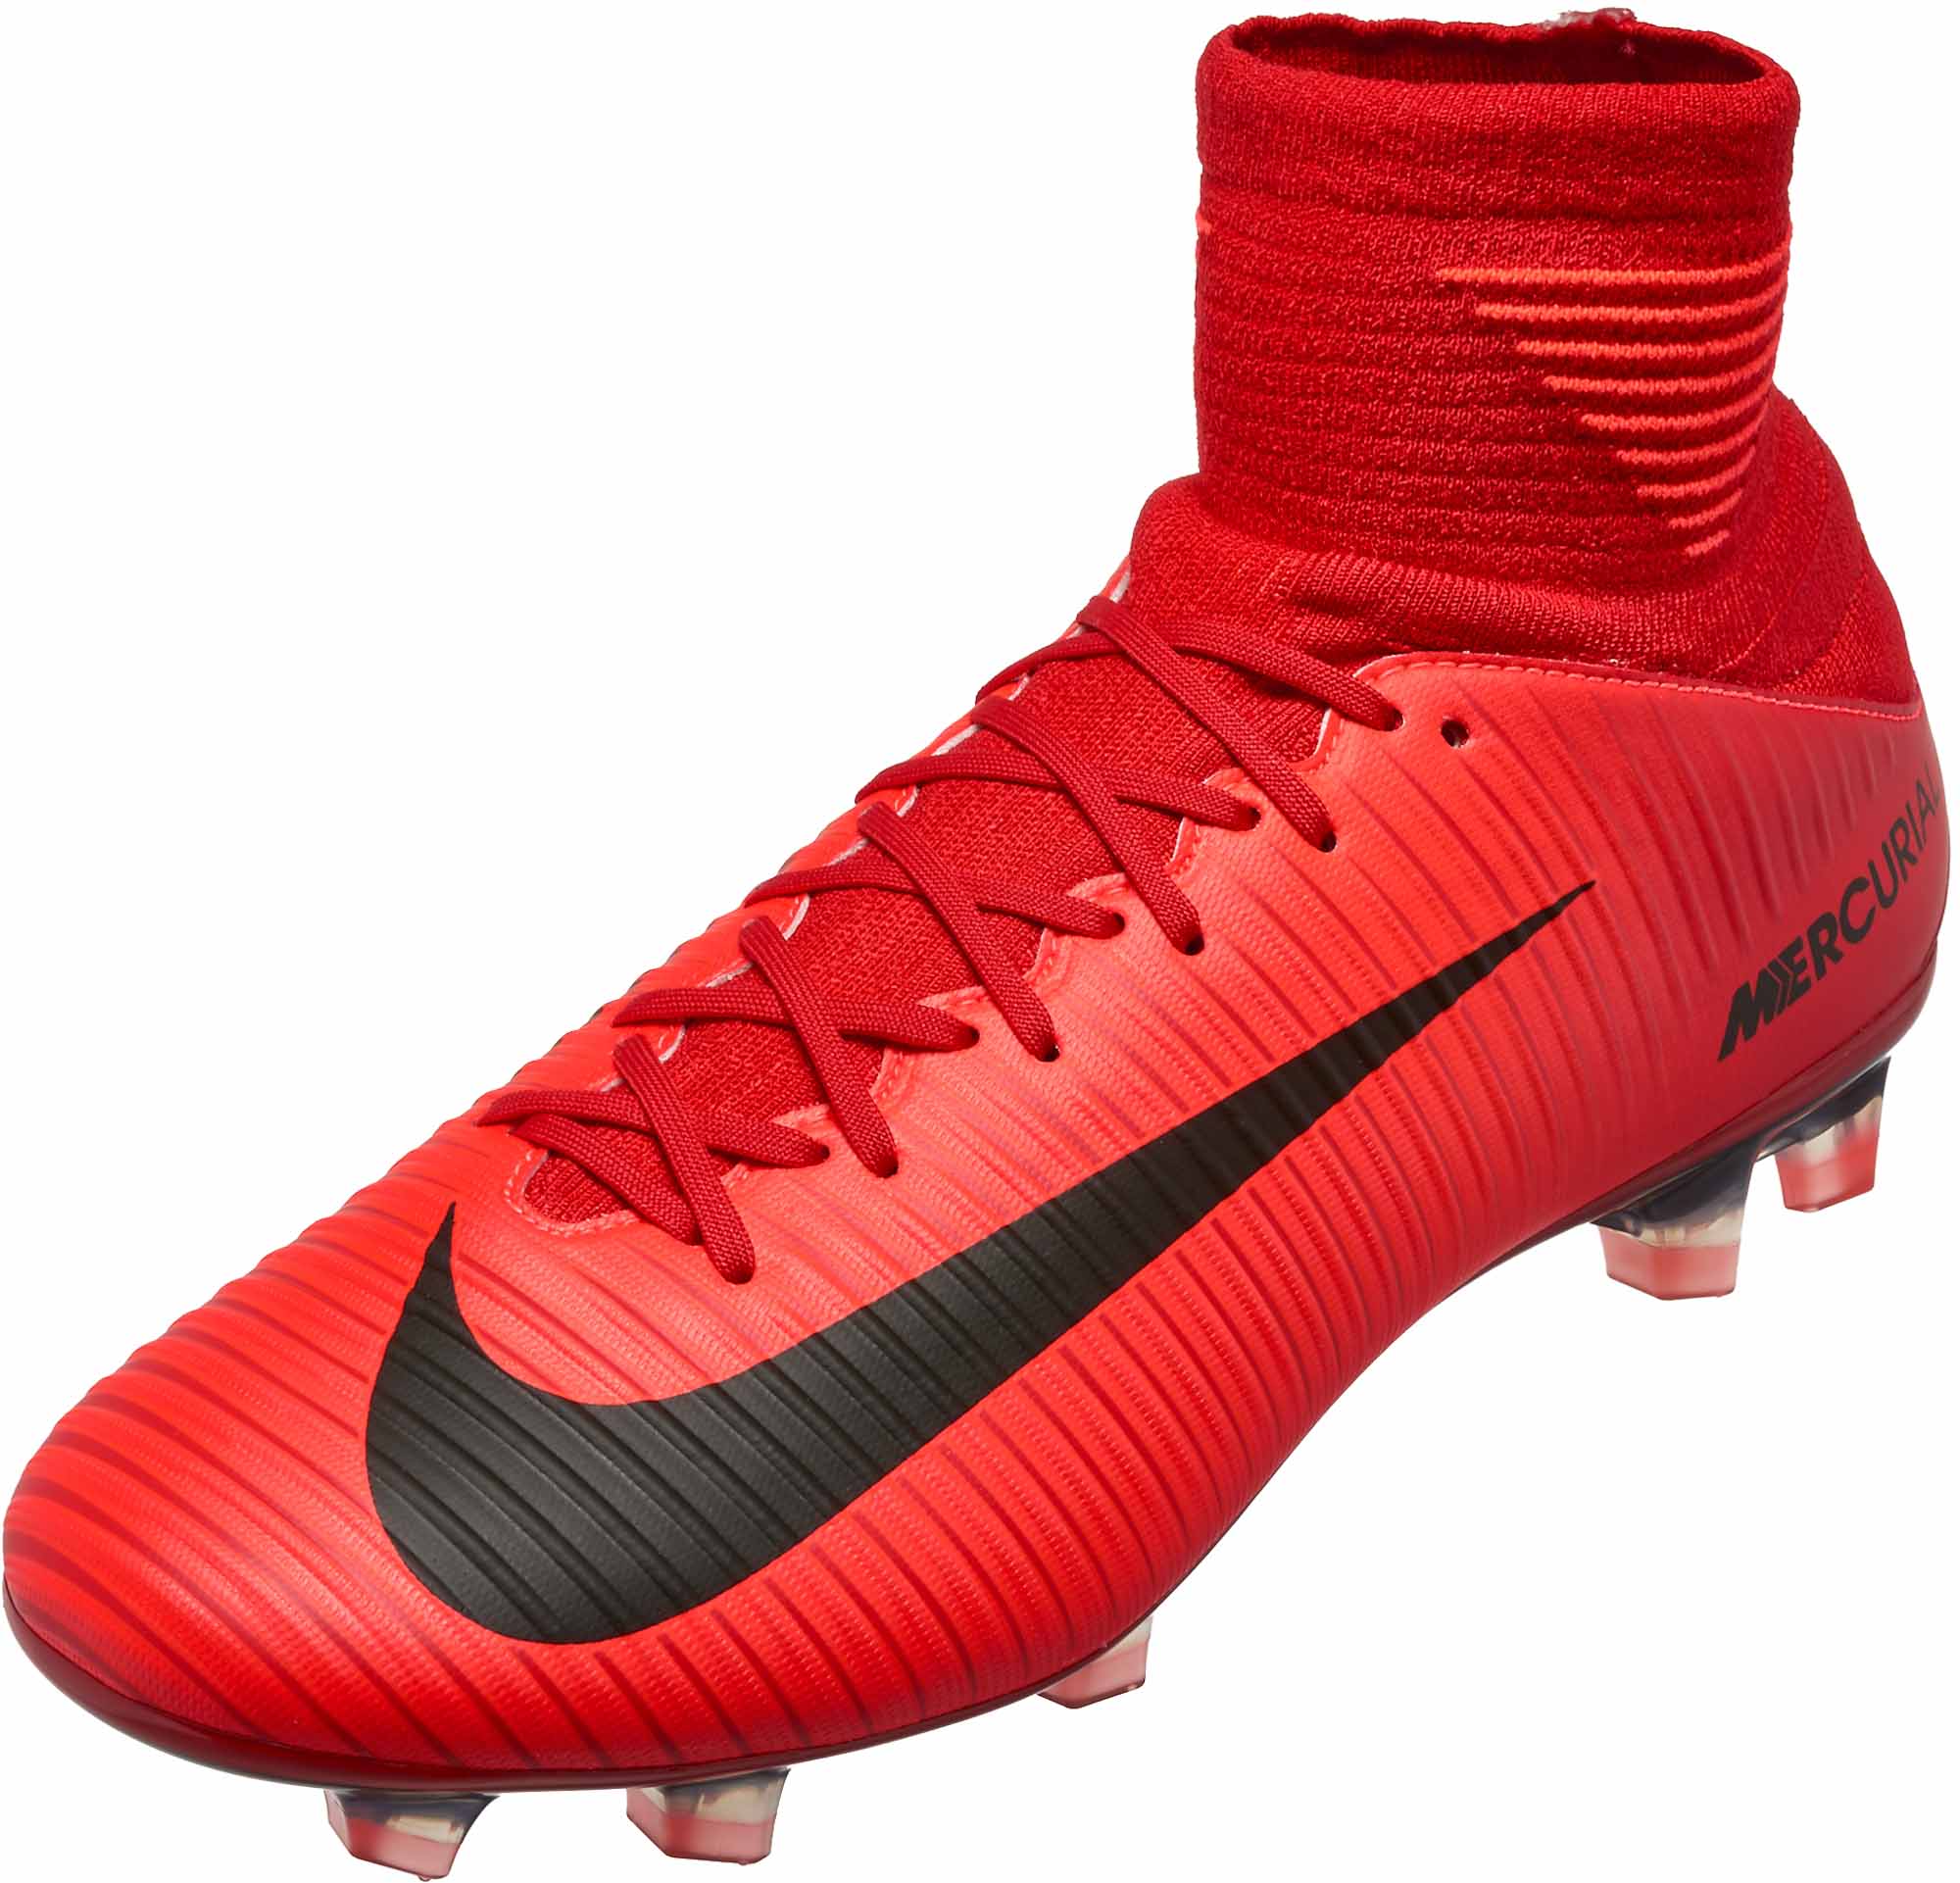 mercurial red cleats